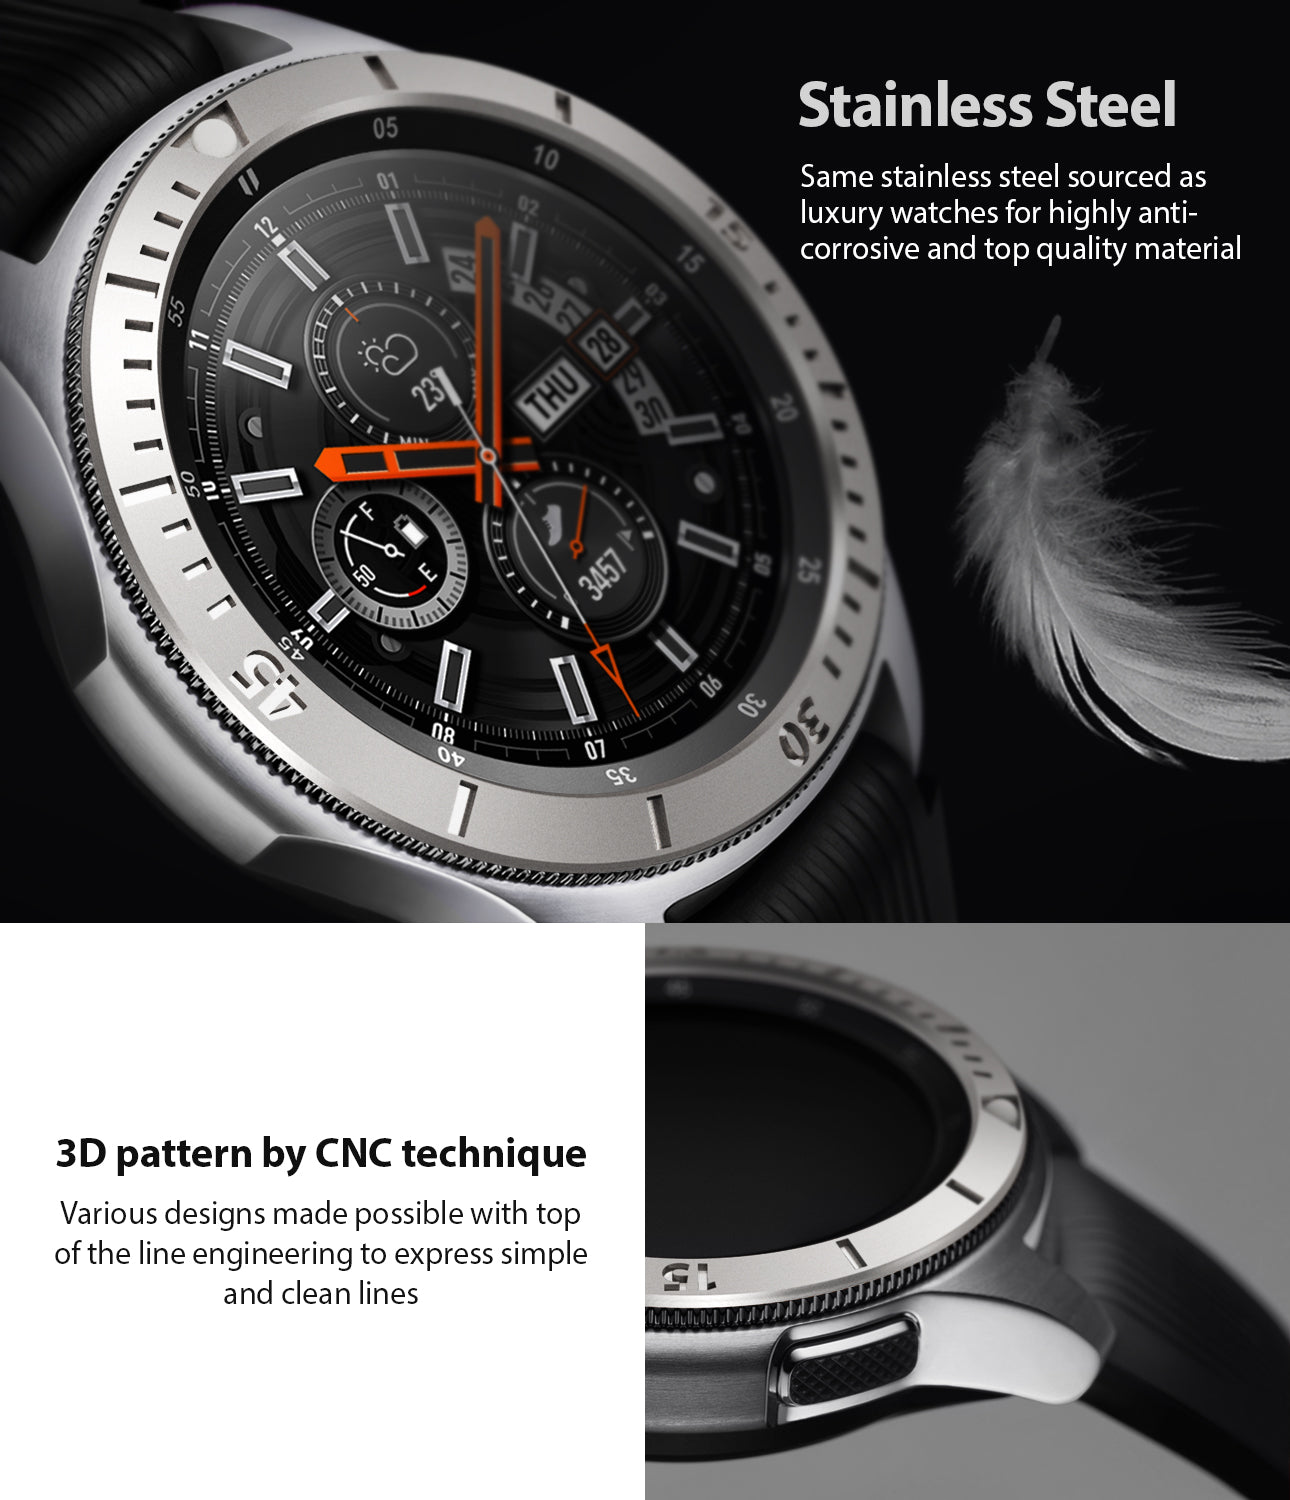 ringke bezel styling for samsung galaxy watch made from stainless steel with 3d pattern by cnc technique for long lasting use